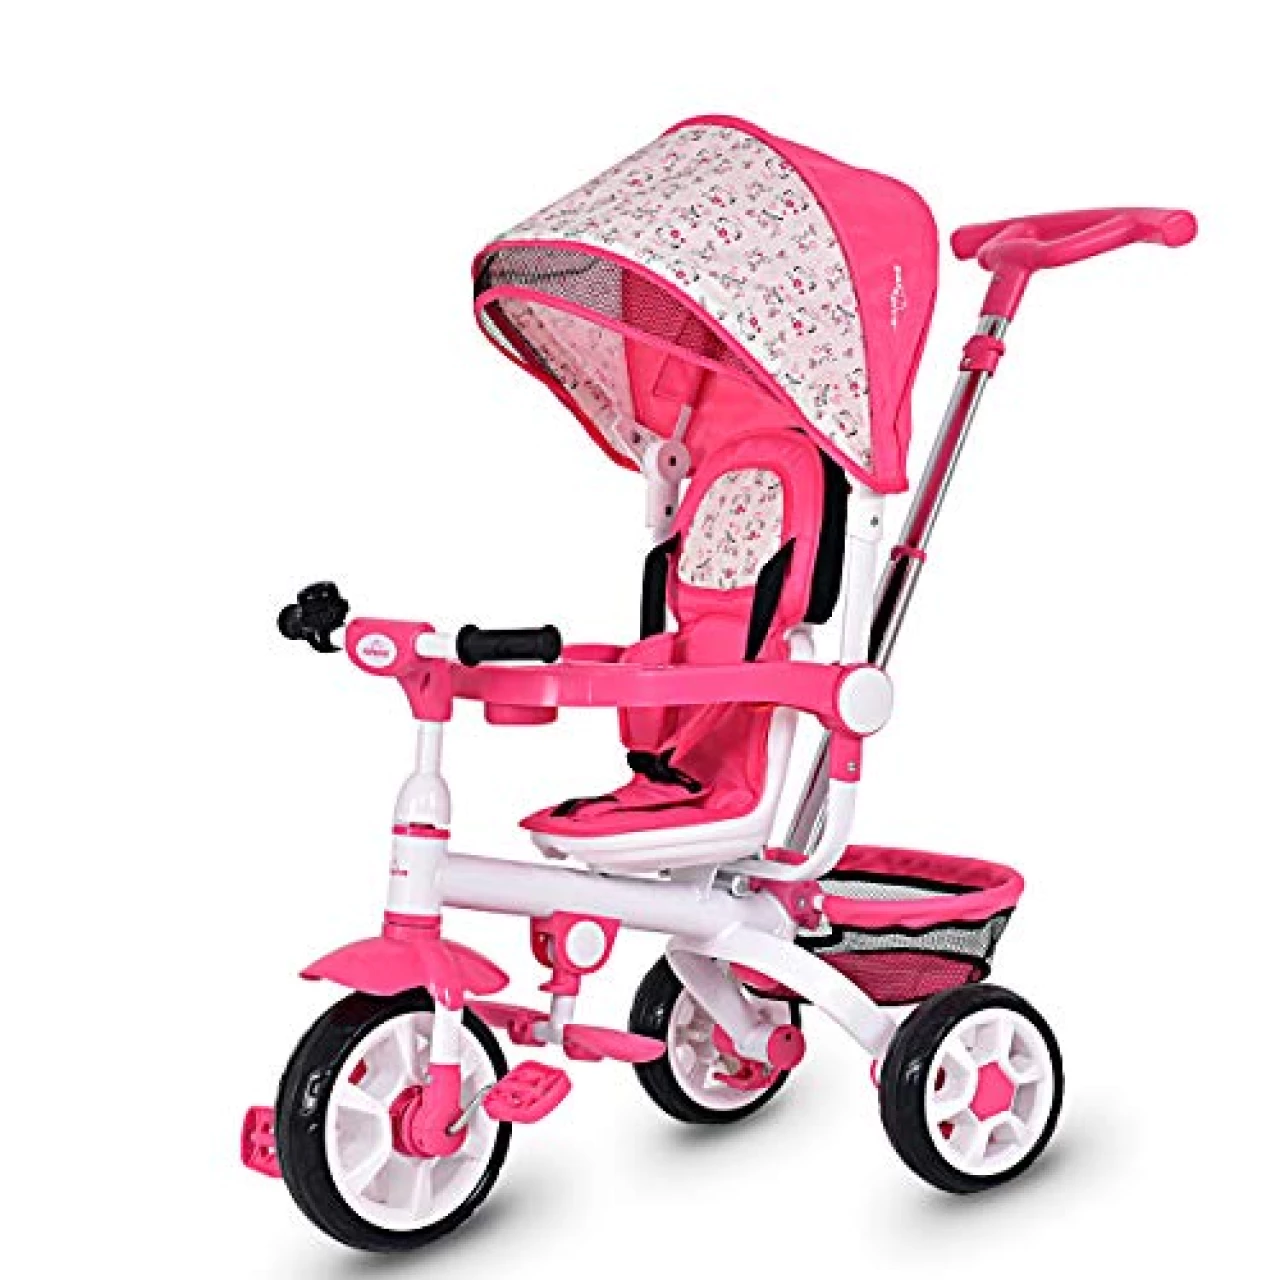 Costzon Tricycle for Toddlers, 4 in 1 Trike w/Parent Handle, Adjustable Canopy, Storage, Safety Harness &amp; Wheel Brakes, Baby Push Tricycle Stroller for Kids Boys Girls Aged 10 Month-5 Years Old, Pink